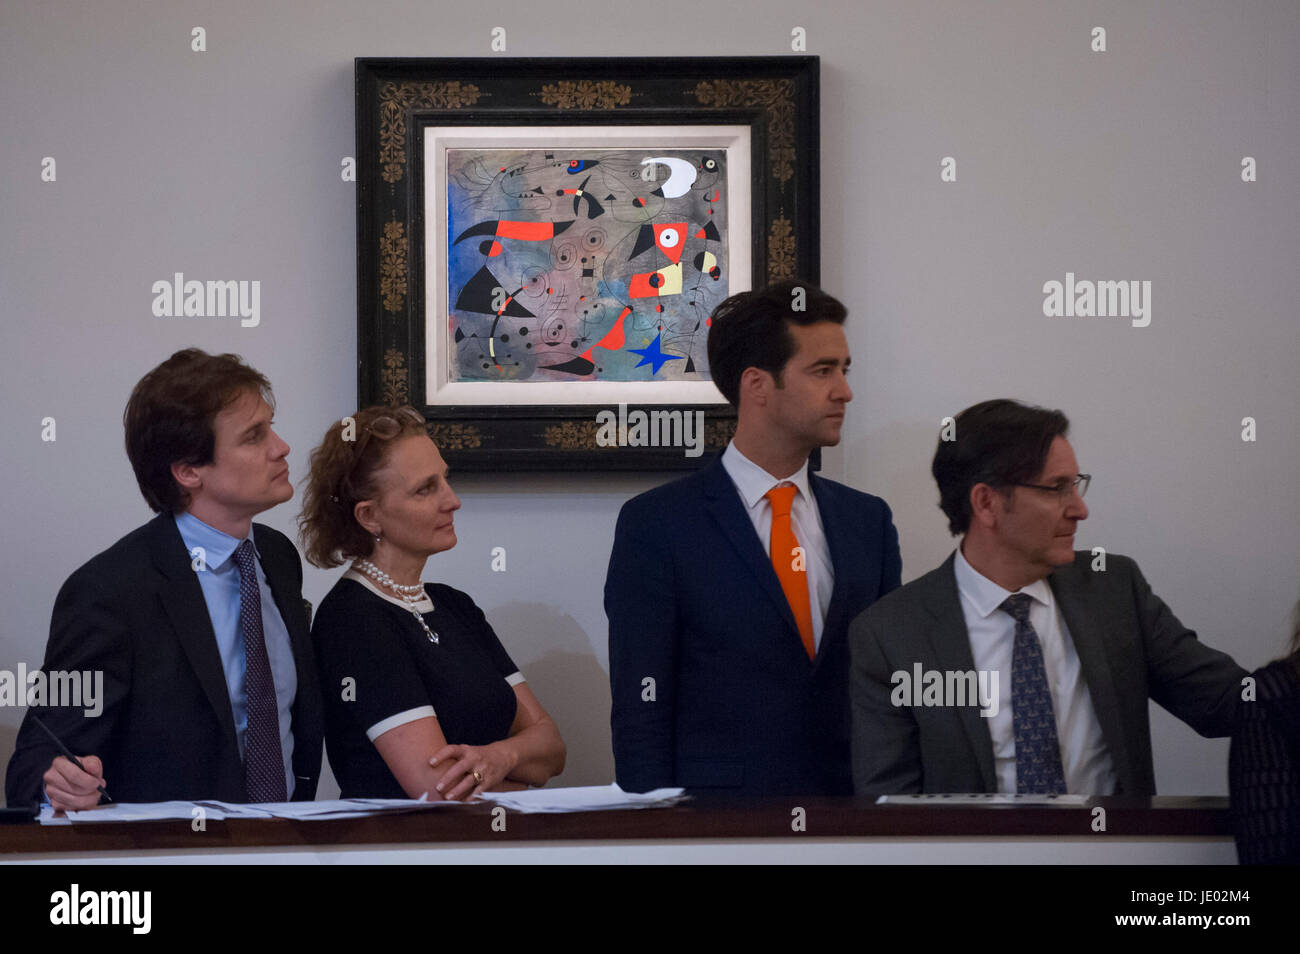 London, UK.  21 June 2017.  'Femme et oiseaux', 1940, by Joan Miró sold for a hammer price of GBP21.7m (estimate > USD30m) at Sotheby's Impressionist and Modern Art evening sale in New Bond Street. Credit: Stephen Chung / Alamy Live News Stock Photo